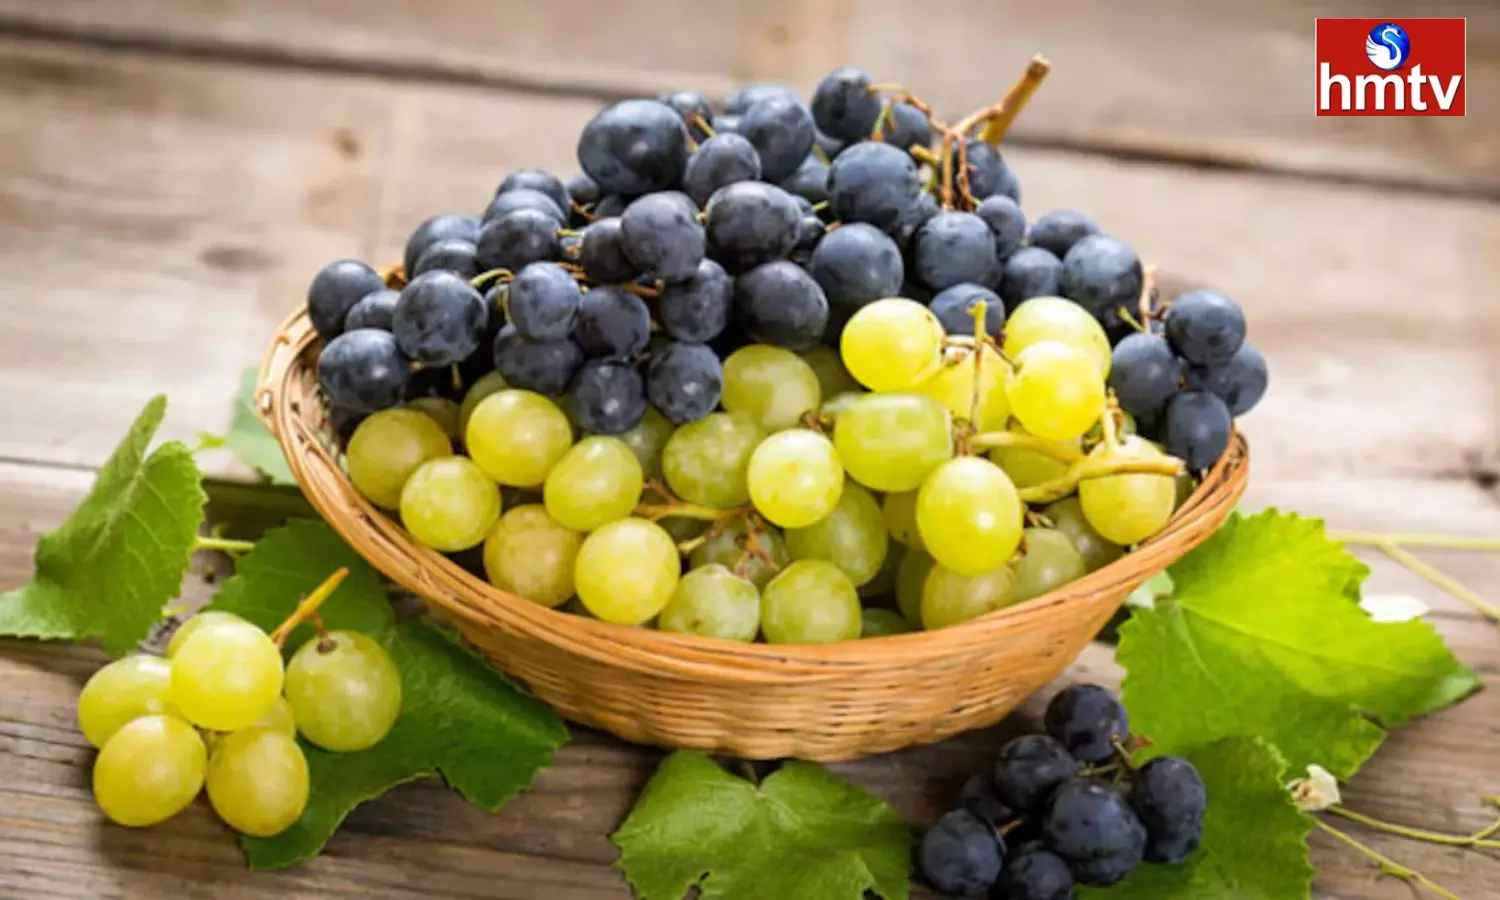 Are You Eating Grapes This Season Know Whether Green Grapes Or Dried Grapes Are Better For Health